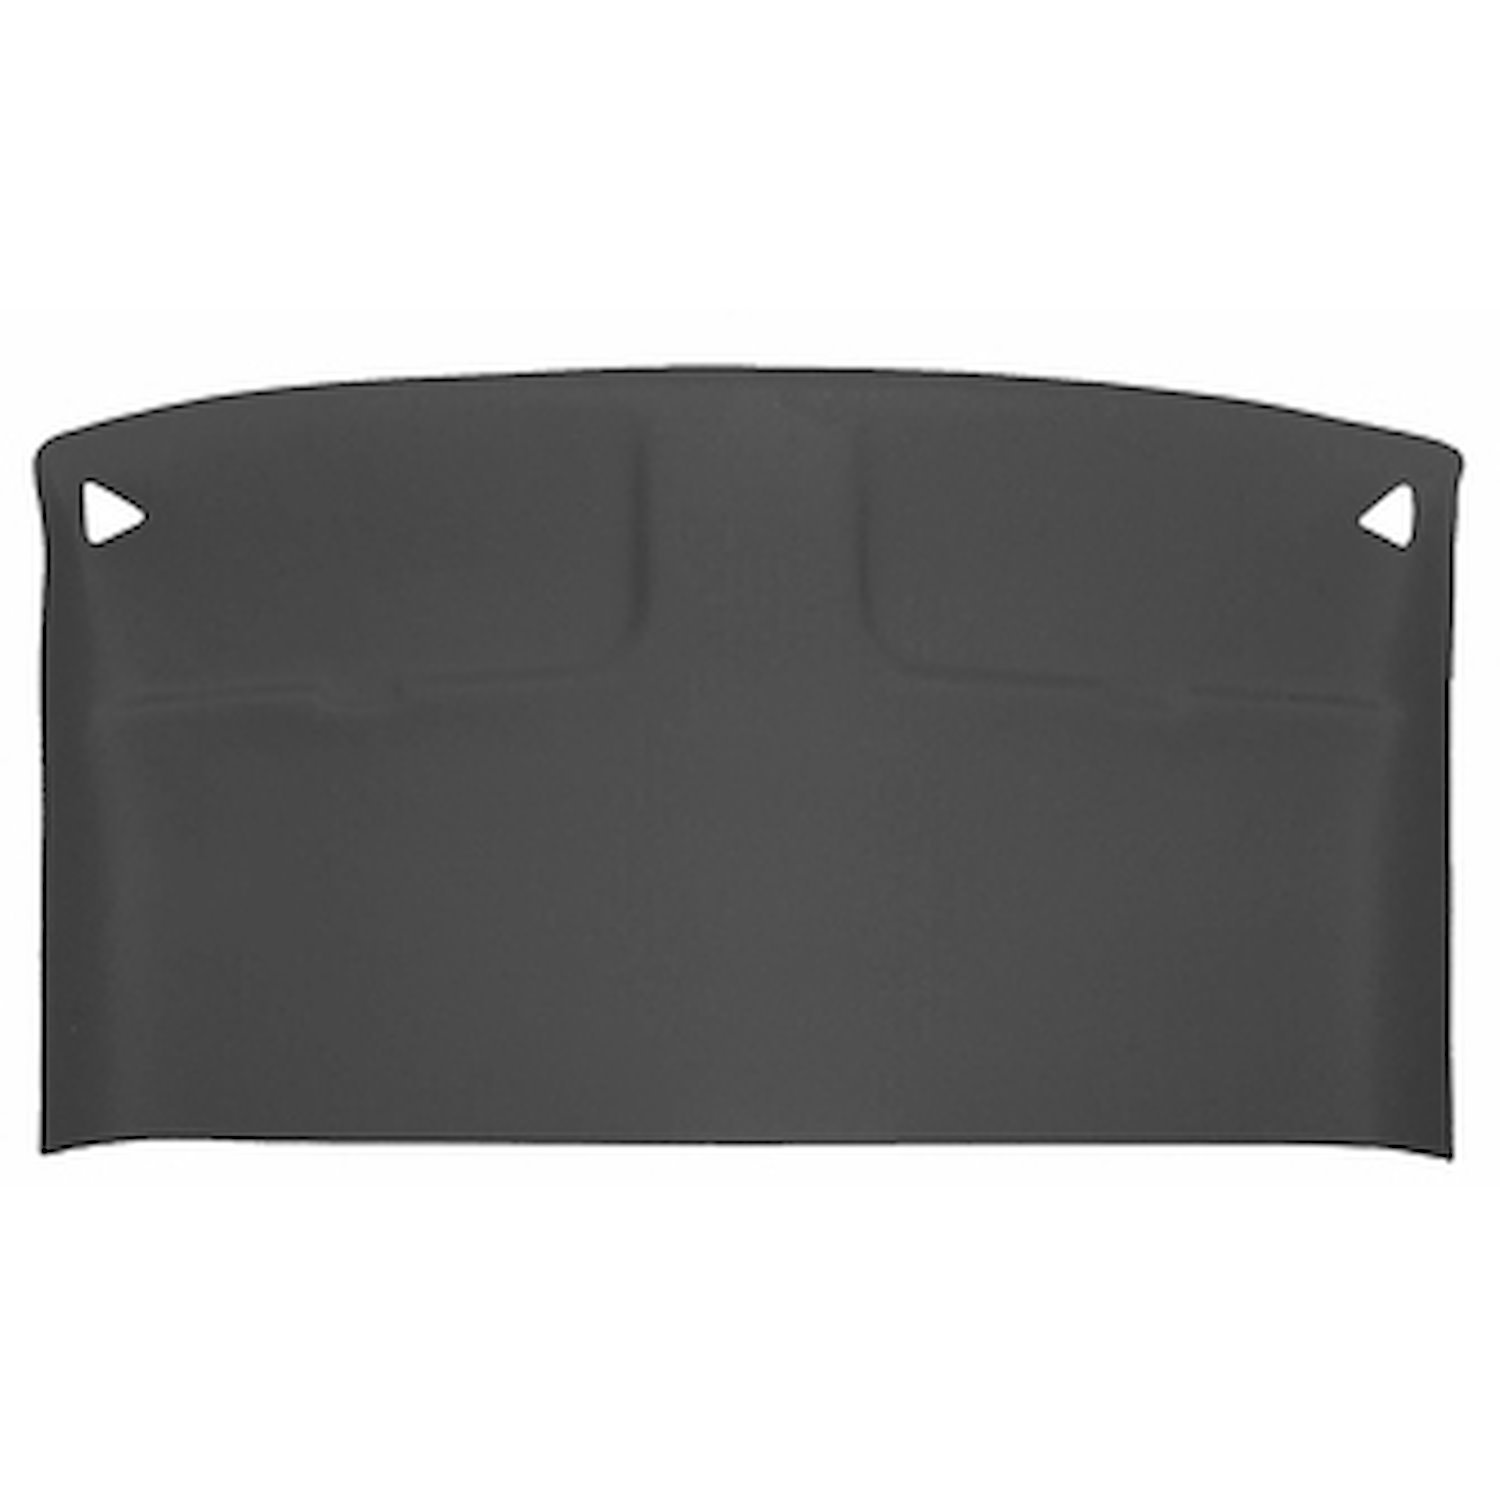 ABS Plastic Headliner 1988-1998 Chevy/GMC C/K Truck Standard Cab - Covered - Navy Blue Cloth